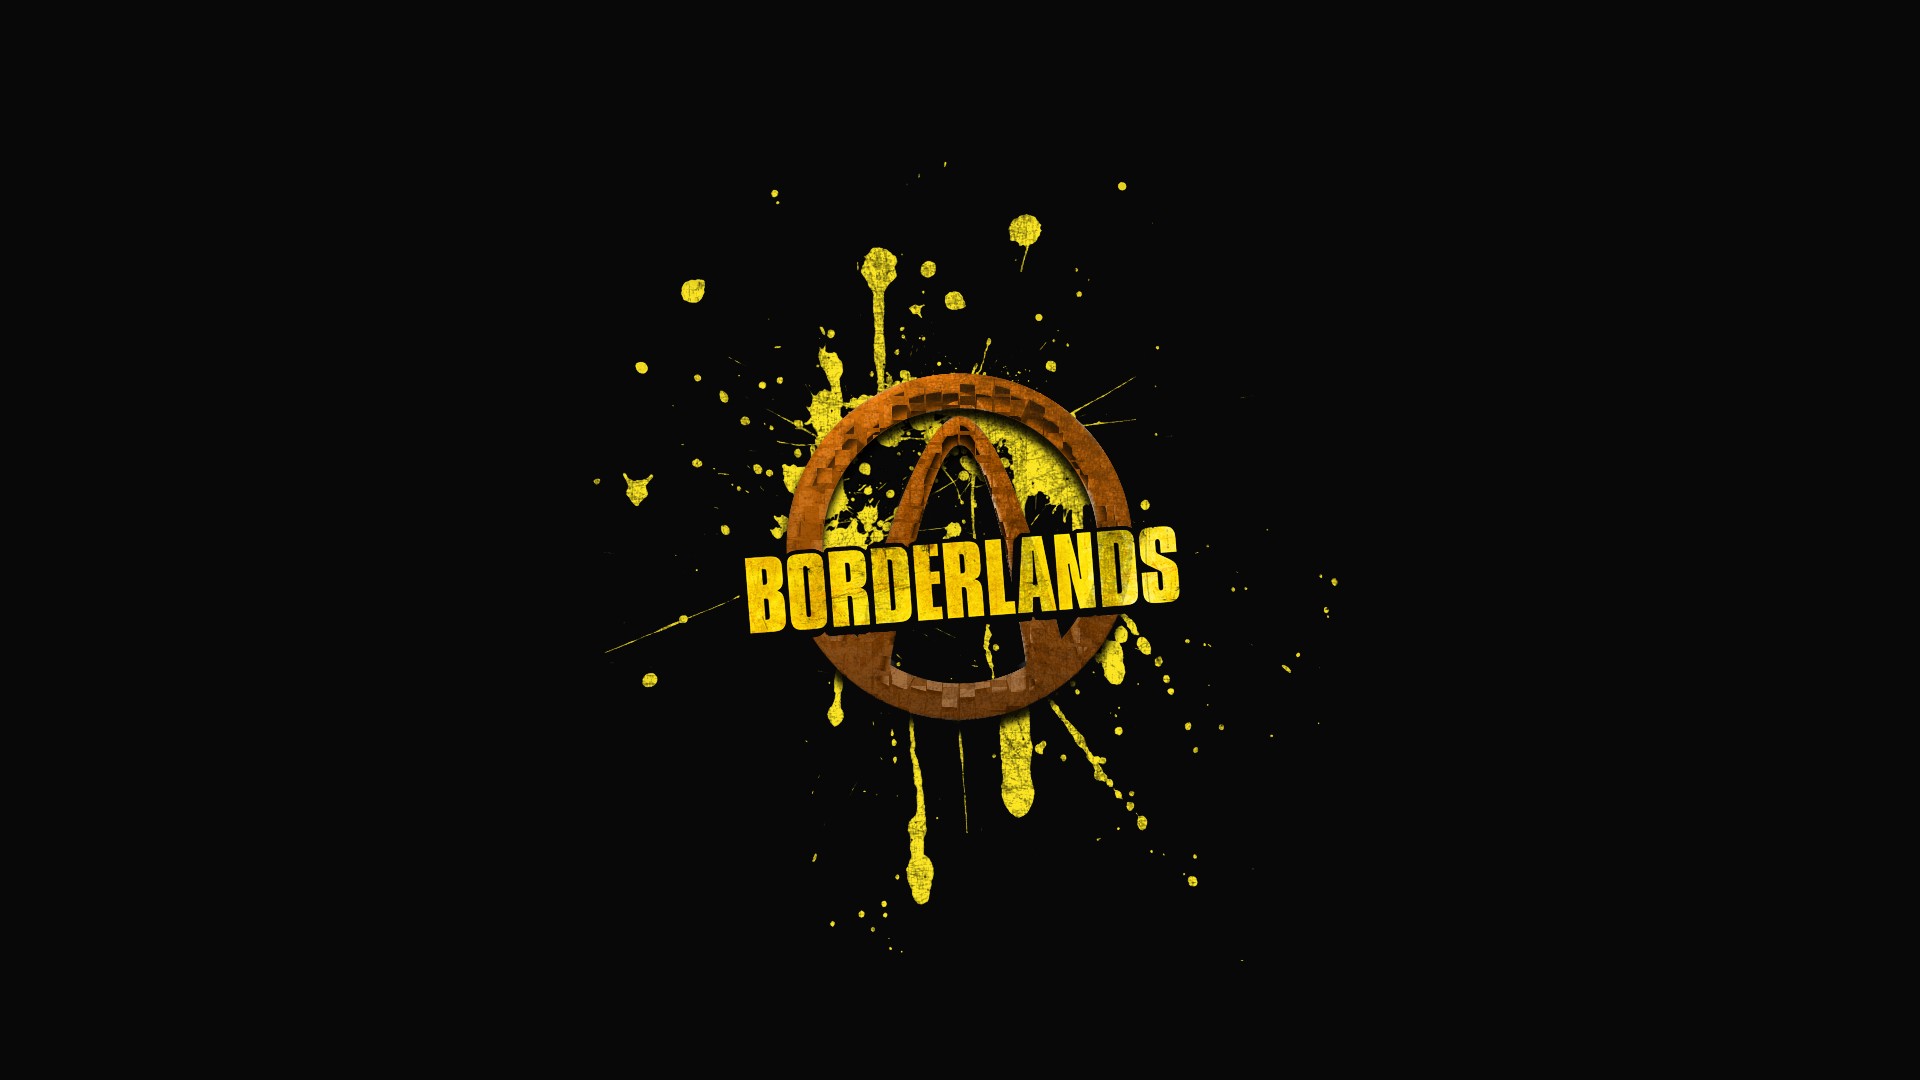 General 1920x1080 Borderlands video games video game art PC gaming simple background black background